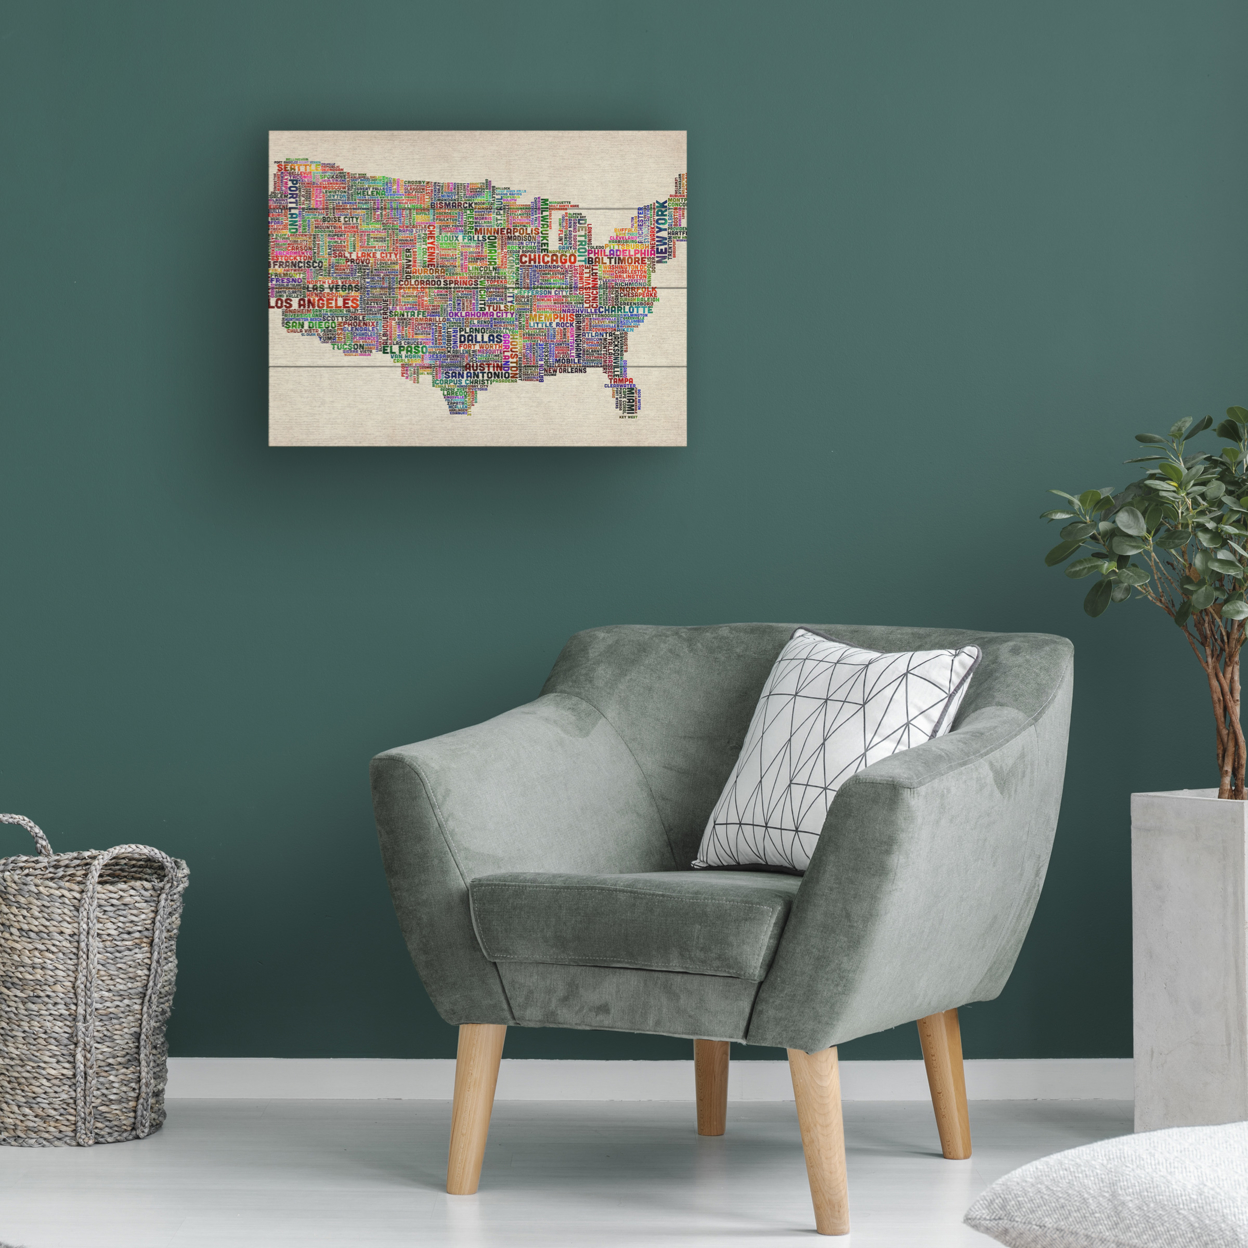 Wall Art 12 X 16 Inches Titled US Cities Text Map VI Ready To Hang Printed On Wooden Planks